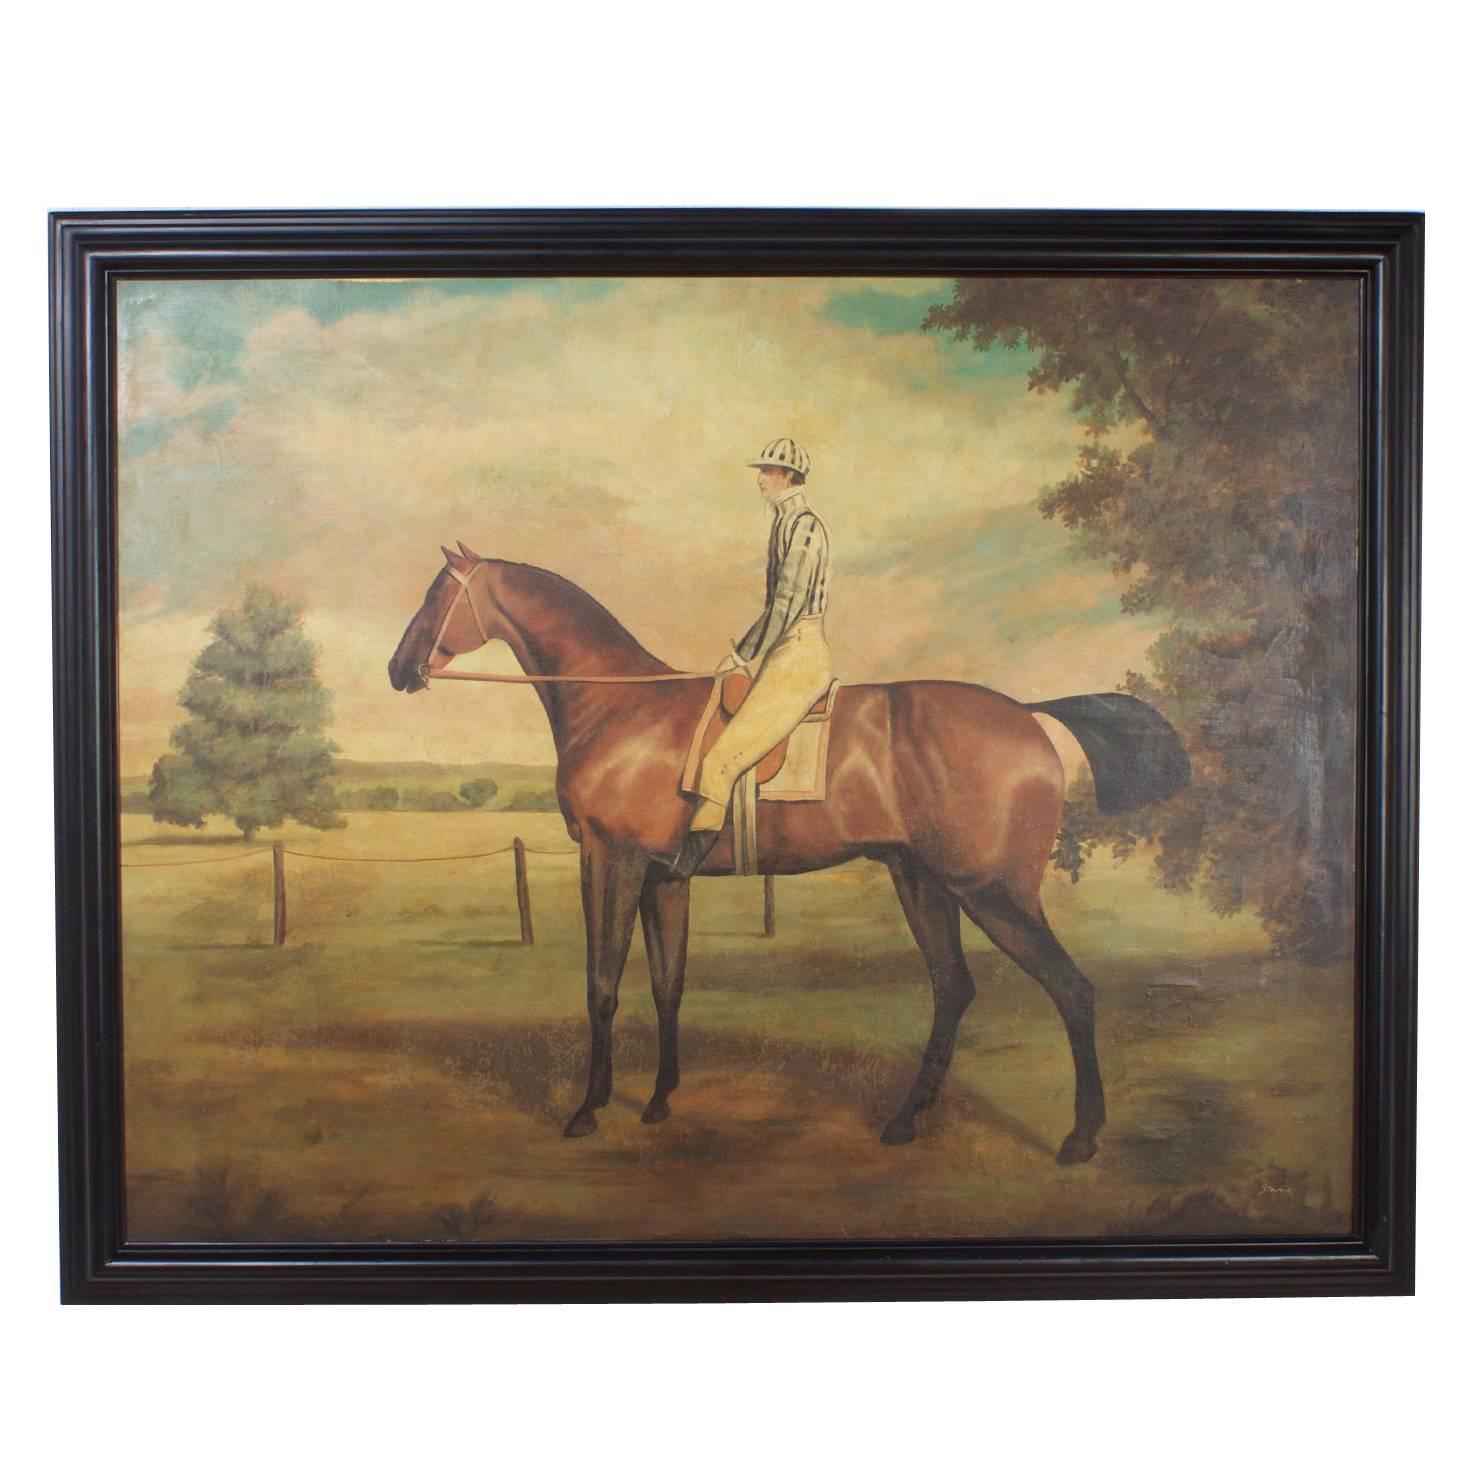 Large Horse and Jockey Oil on Canvas Painting